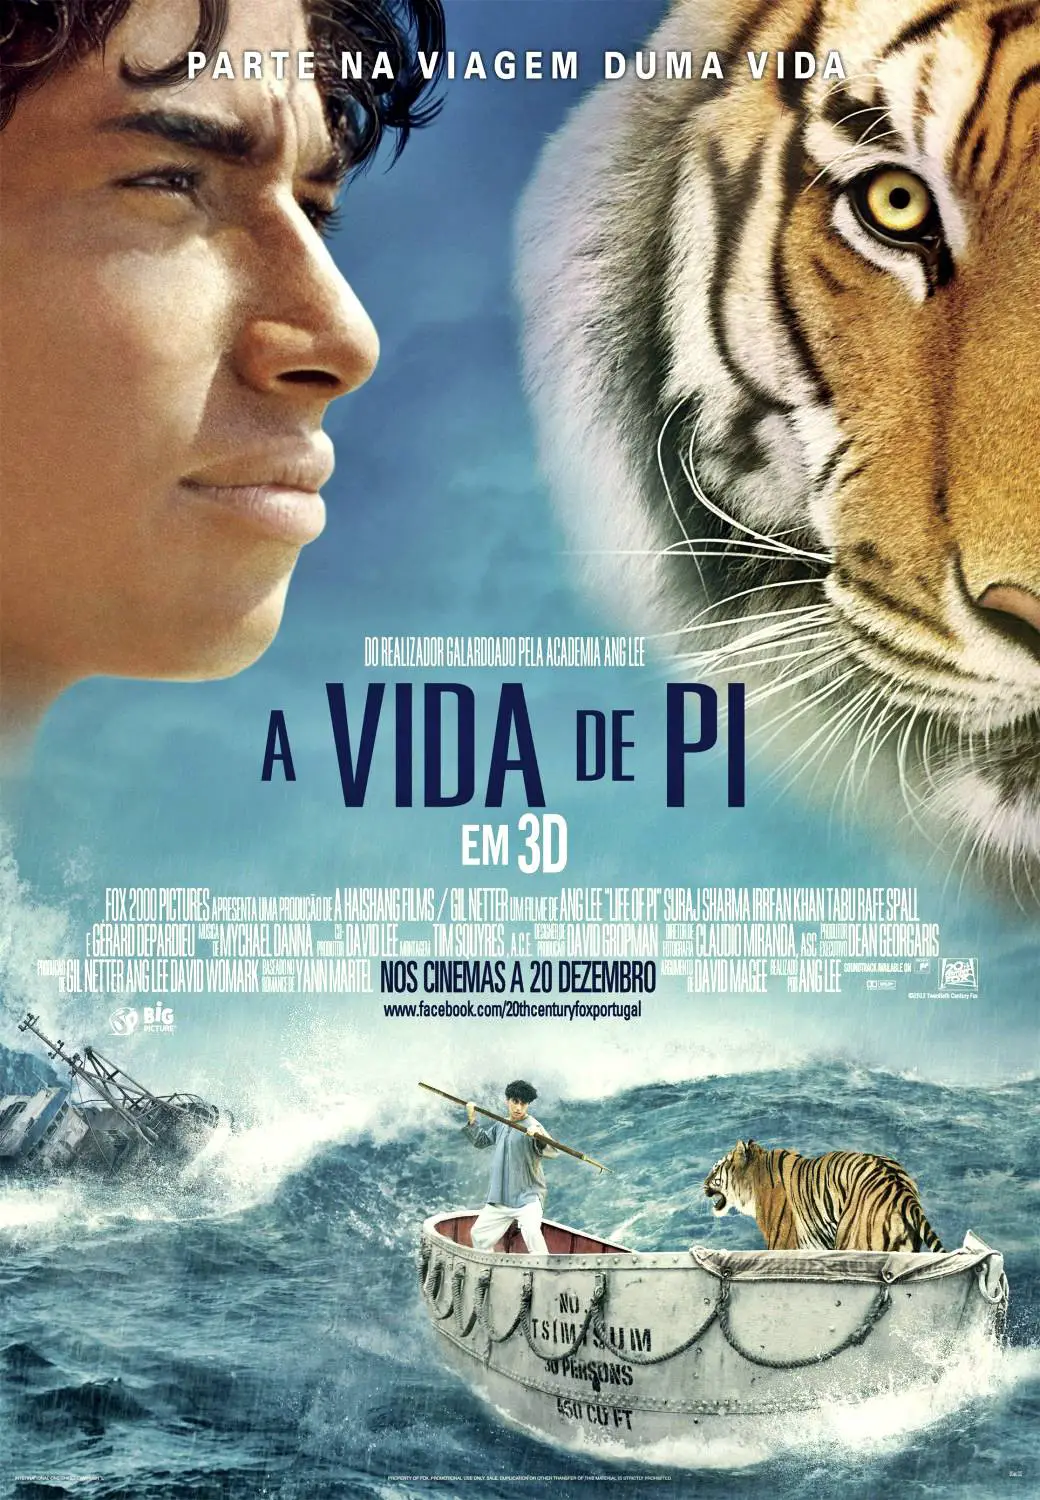 Life of Pi (2012) - Movie HD Wallpapers